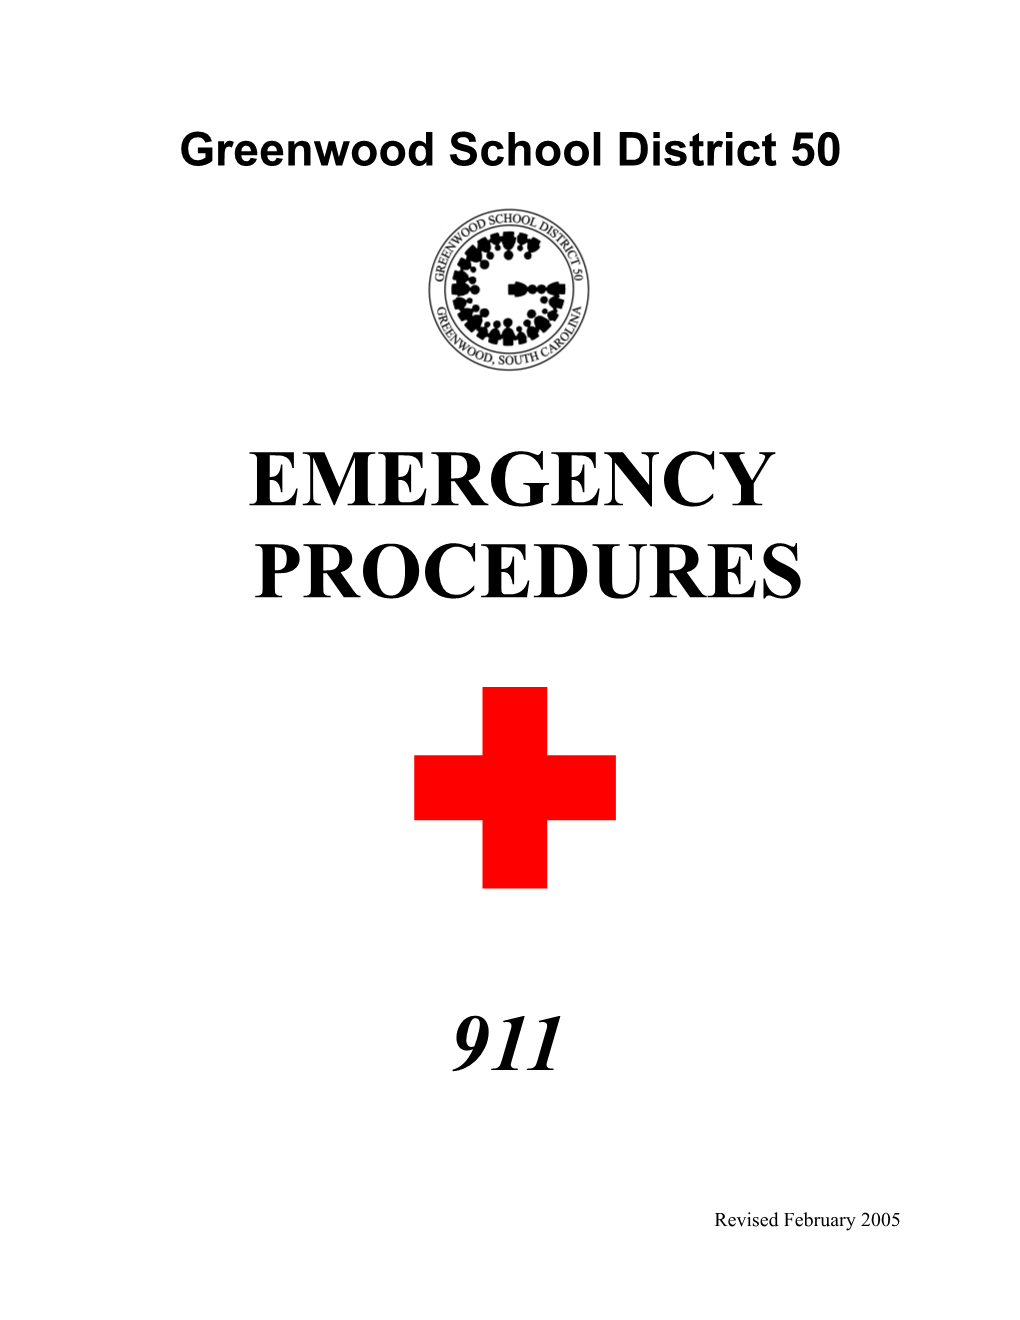 Greenwood School District 50 Guidelines for Extreme Medical